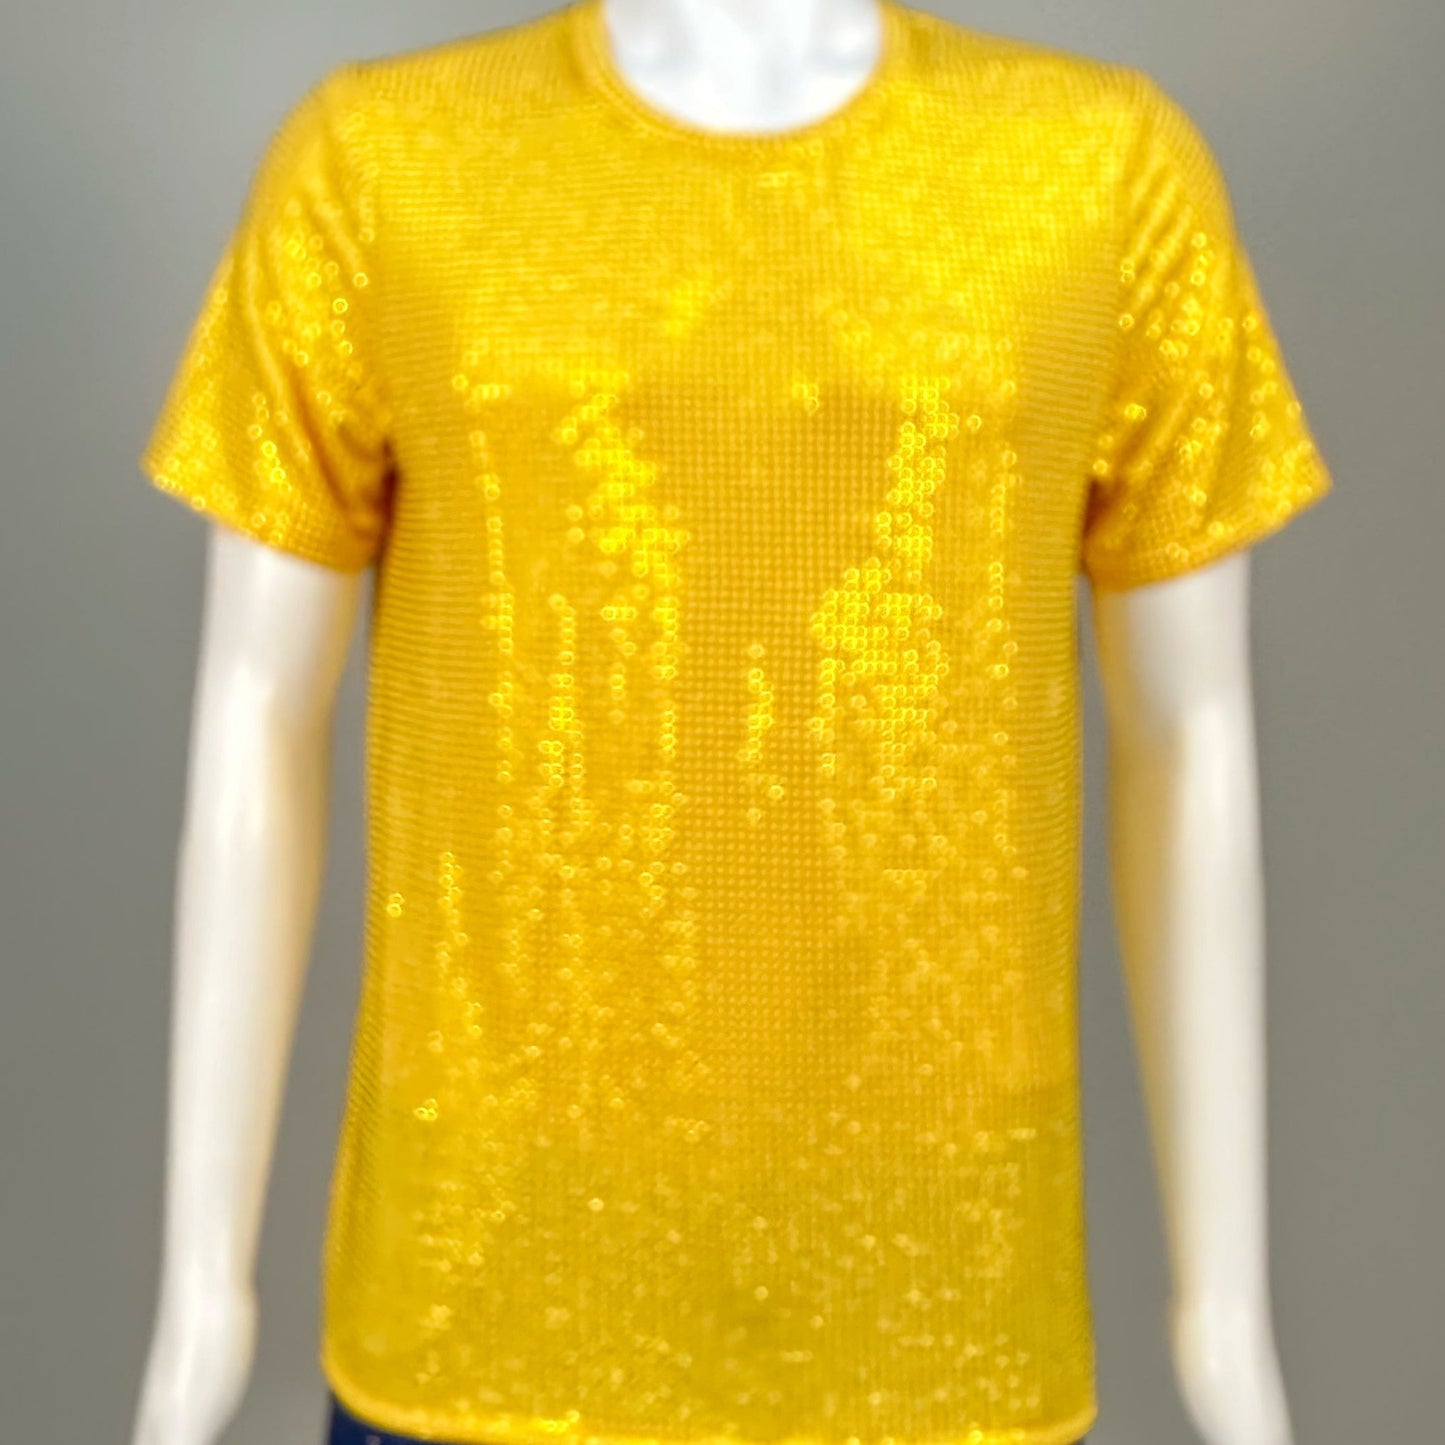 Blurred view of Yellow Crystals on Yellow Fabric T-shirt demonstrating how the garment sparkles in videos.